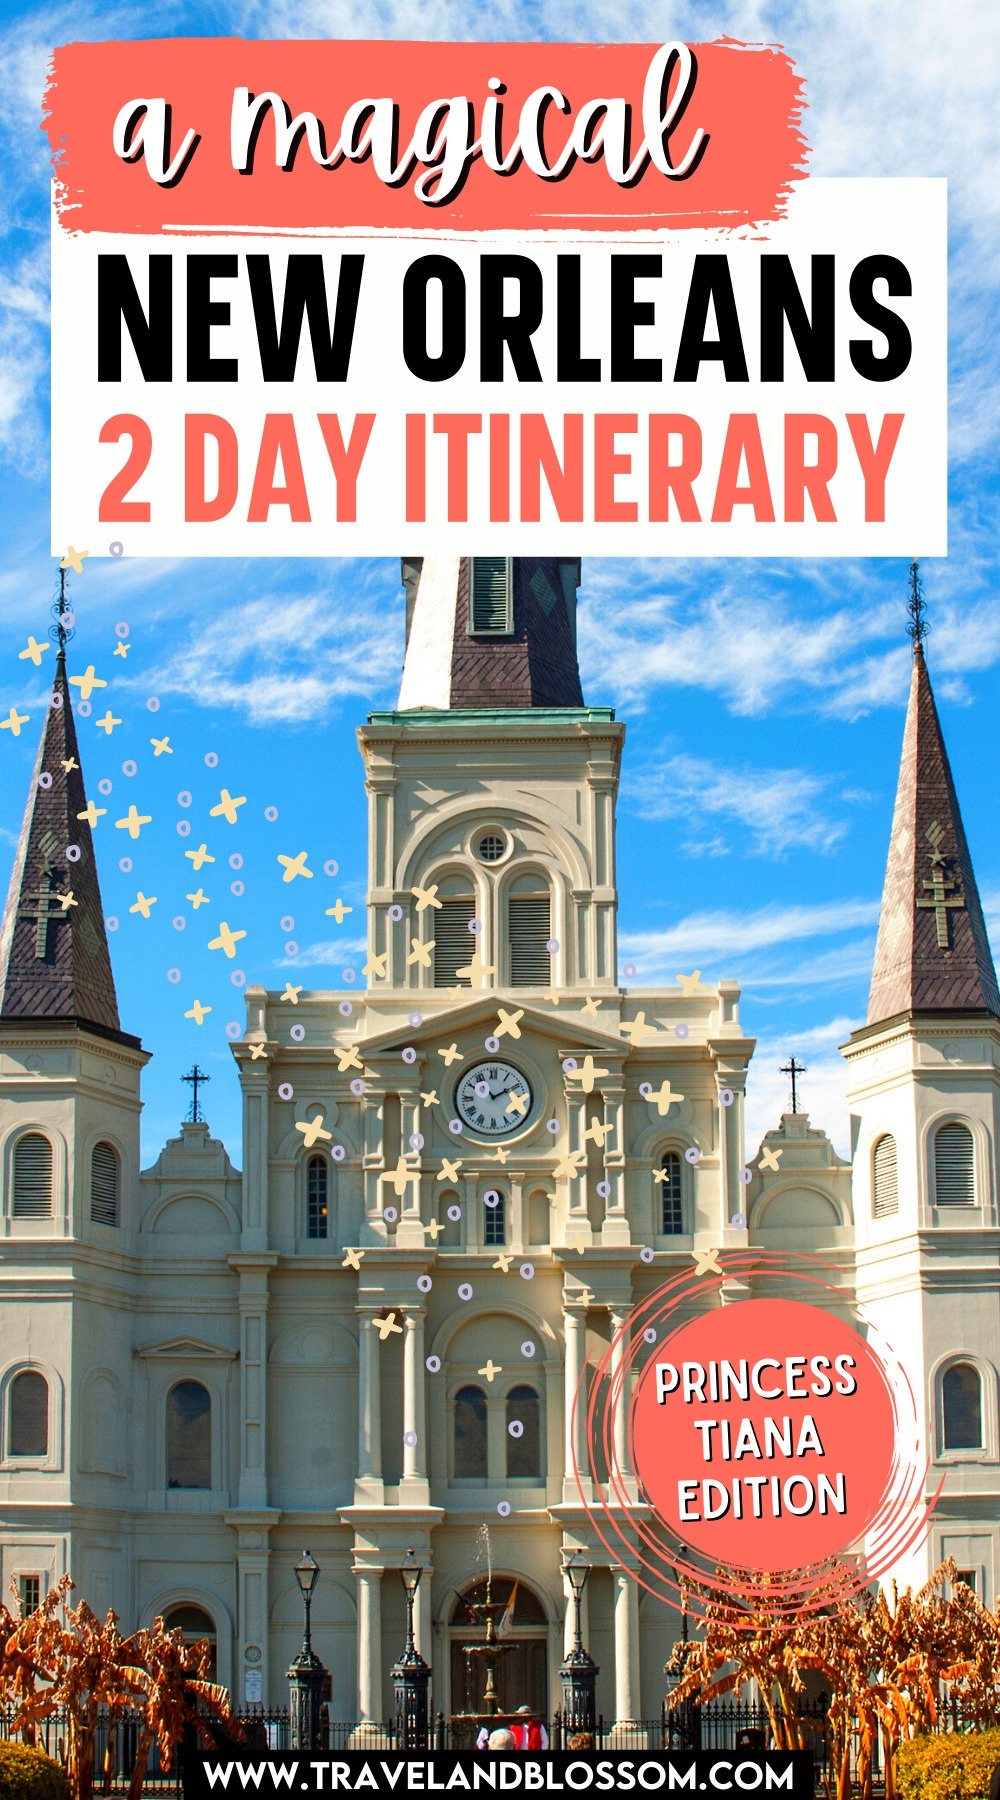 2 Day New Orleans Itinerary: Princess Tiana Edition